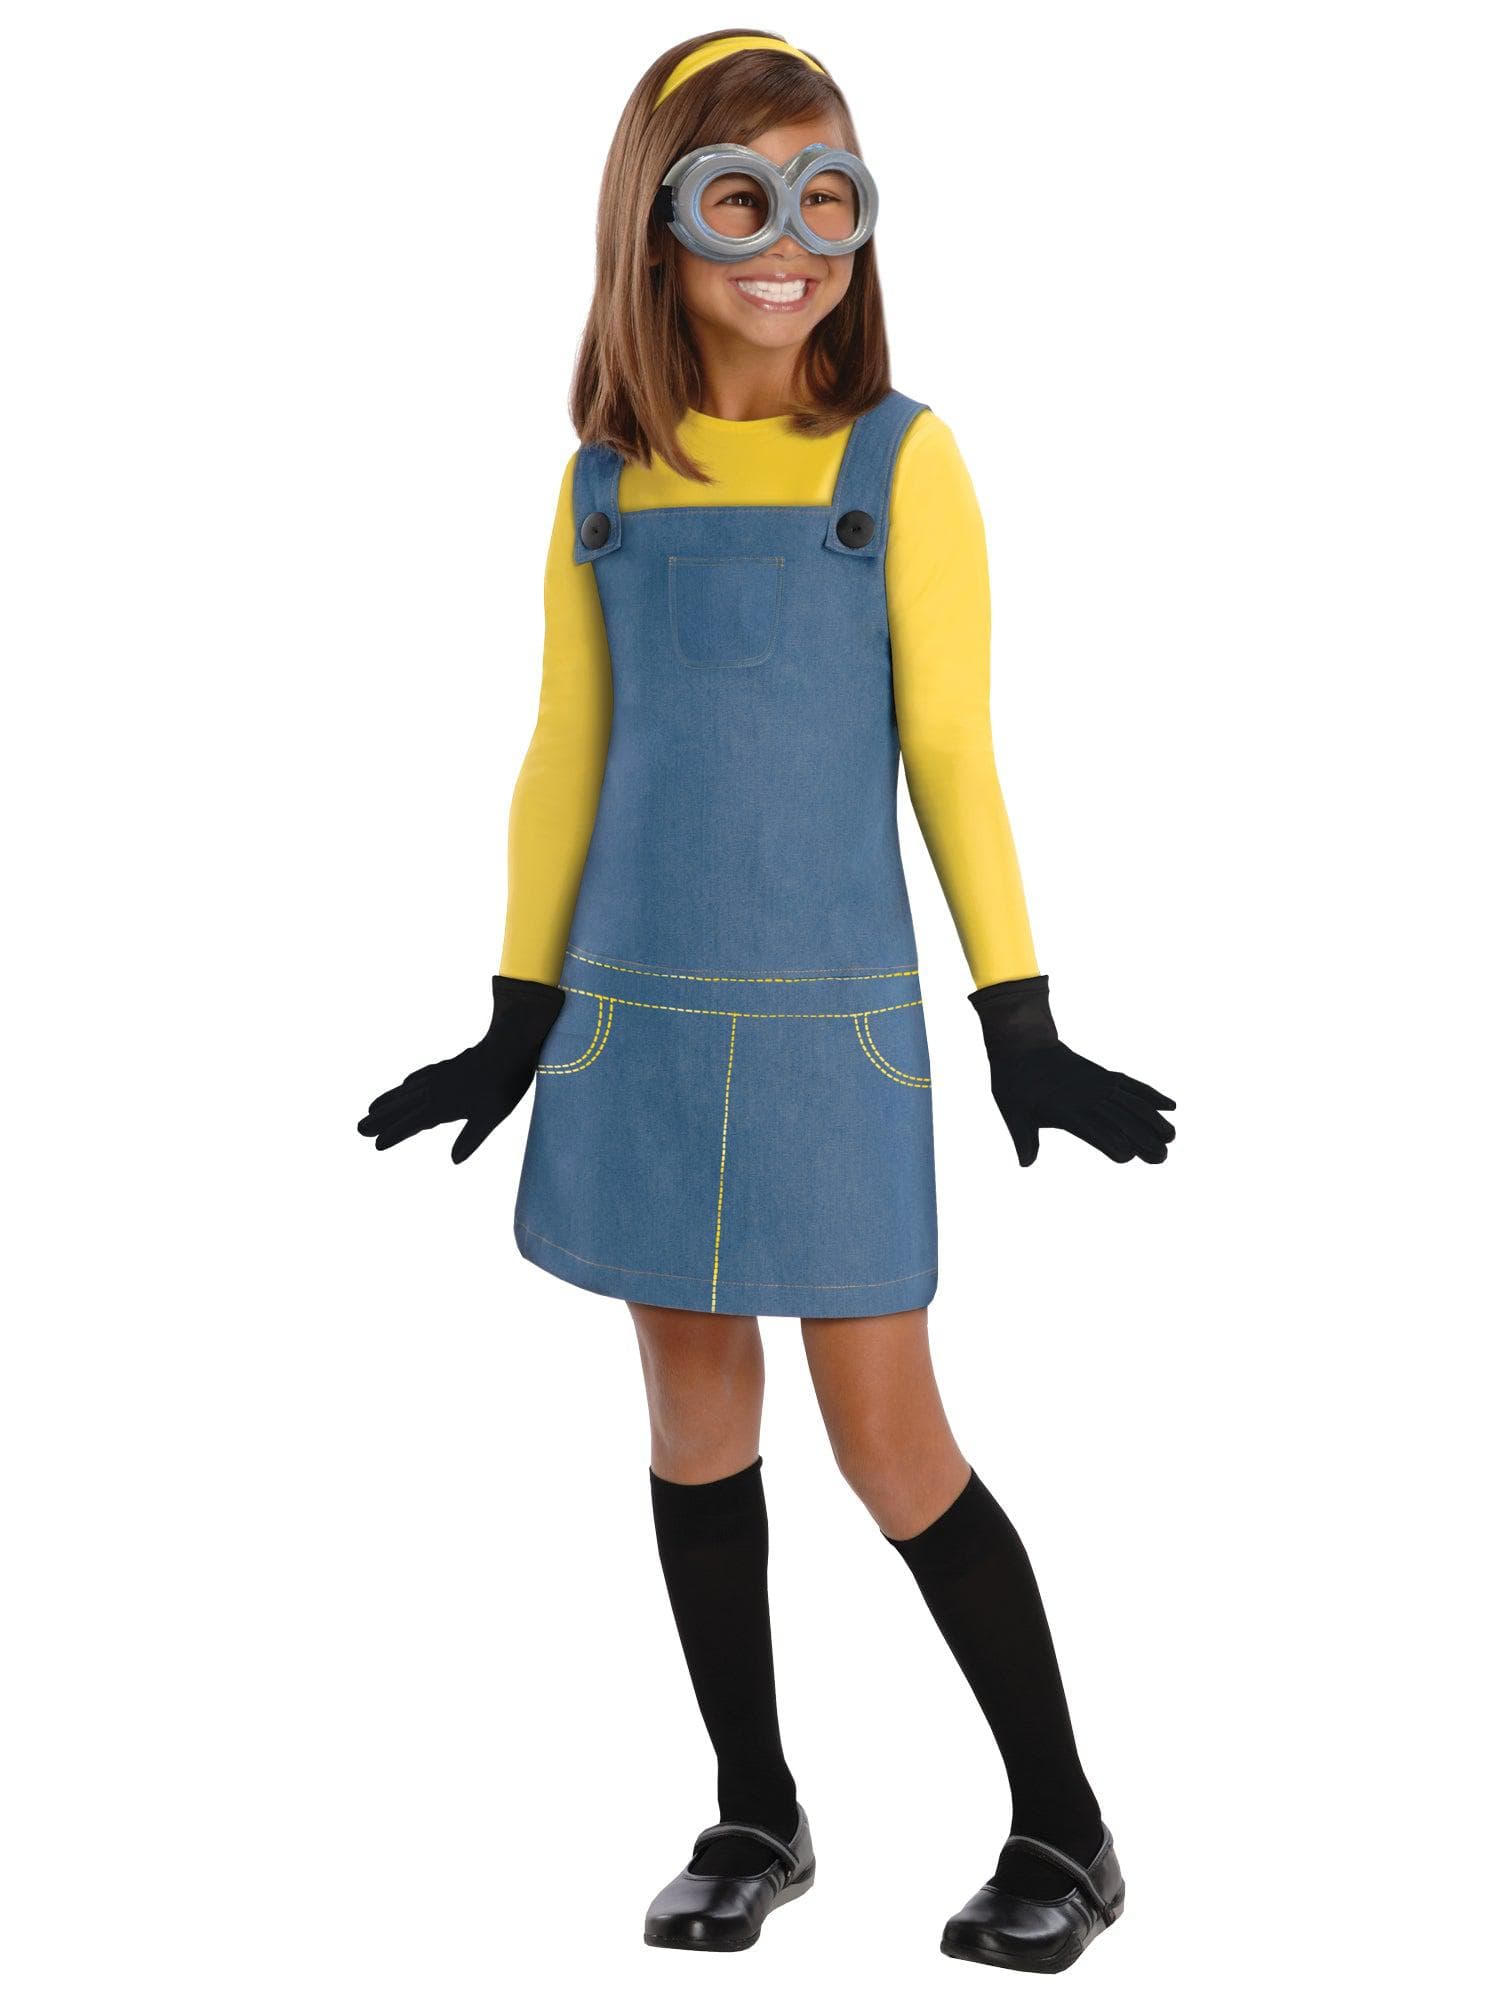 Girls' Despicable Me Minion Girl Dress Costume - costumes.com